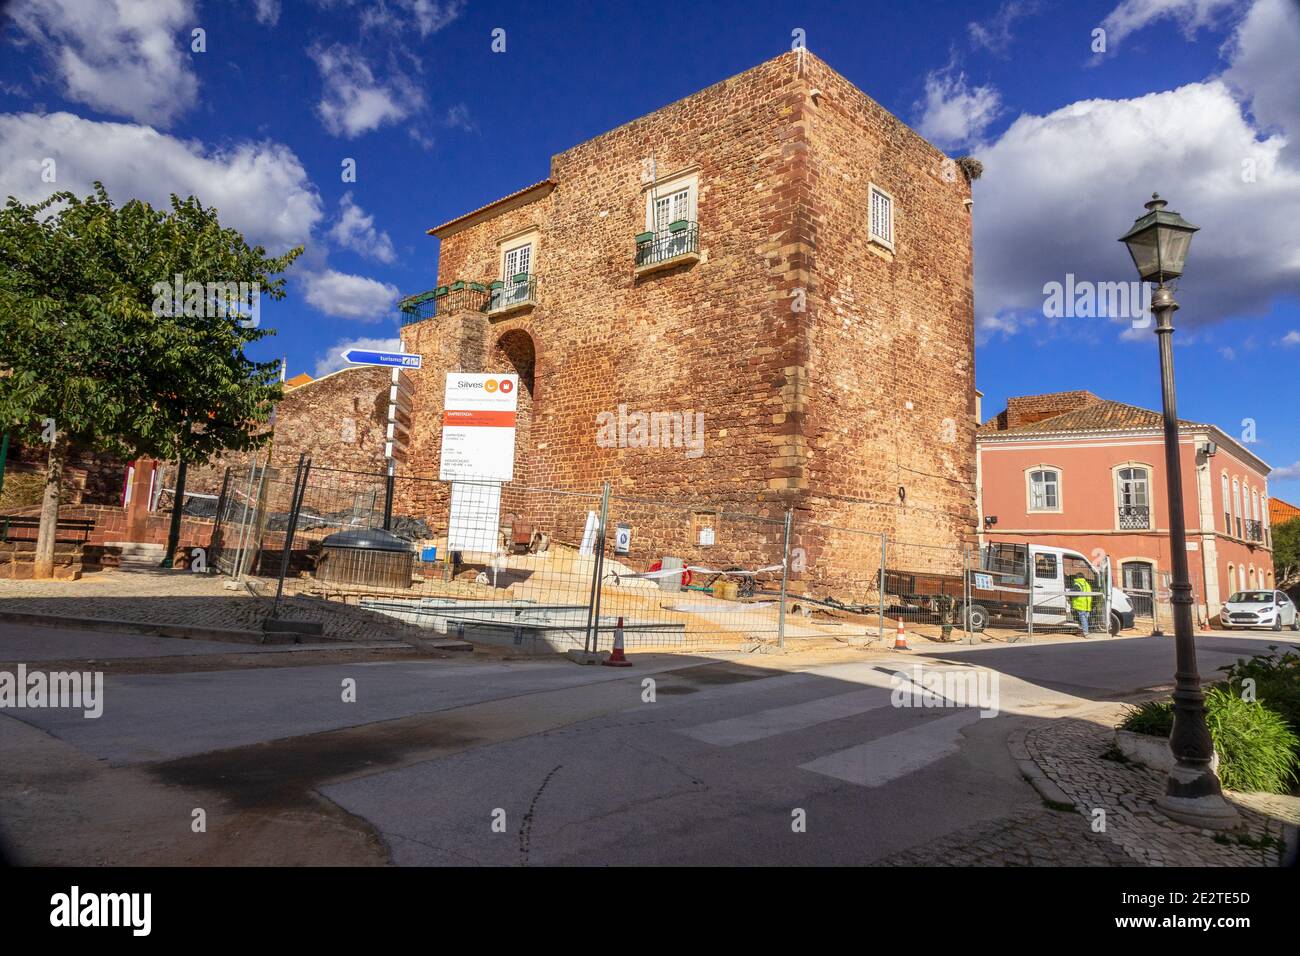 Silves Old City Gate Turret (Portas da Cidade de Silves), There Is City Construction Excavation In Front Of The Gate Building Silves, The Algarve, Por Stock Photo